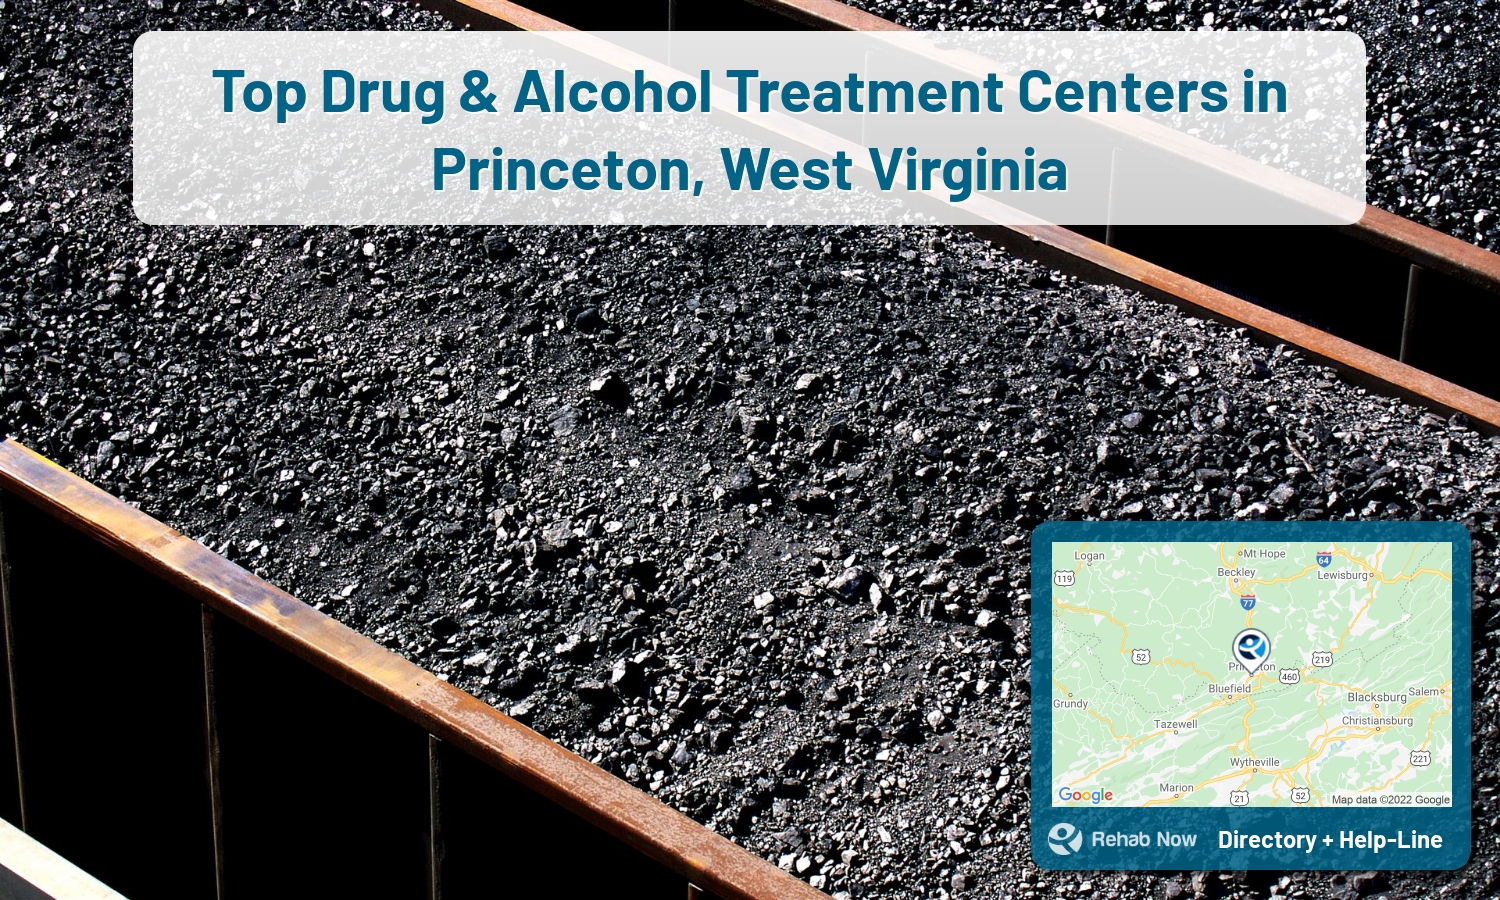 Need treatment nearby in Princeton, West Virginia? Choose a drug/alcohol rehab center from our list, or call our hotline now for free help.